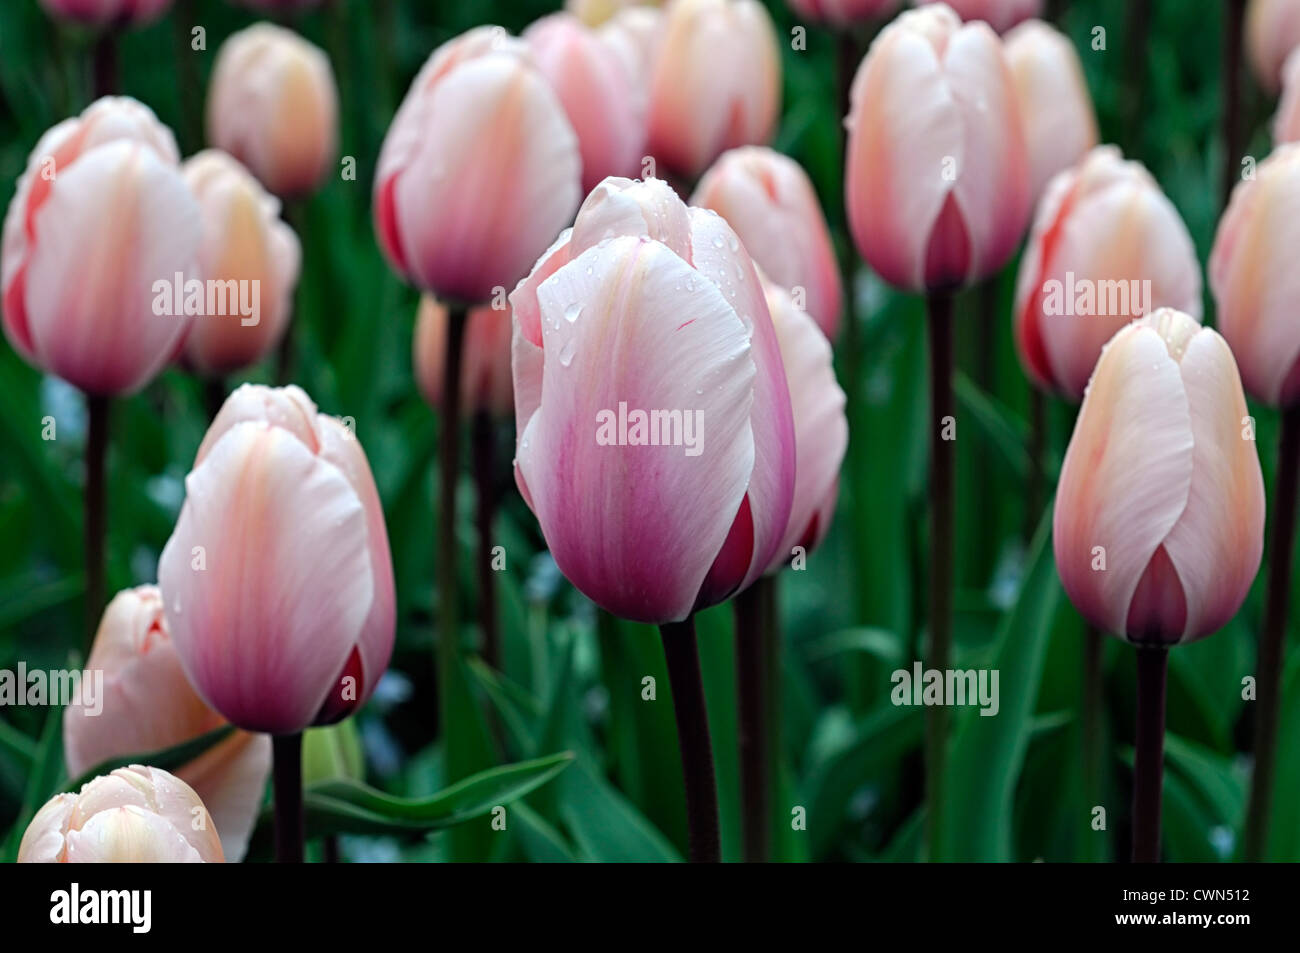 tulipa key largo single late tulip salmon pink garden flowers spring flower bloom blossom bed colour color Stock Photo